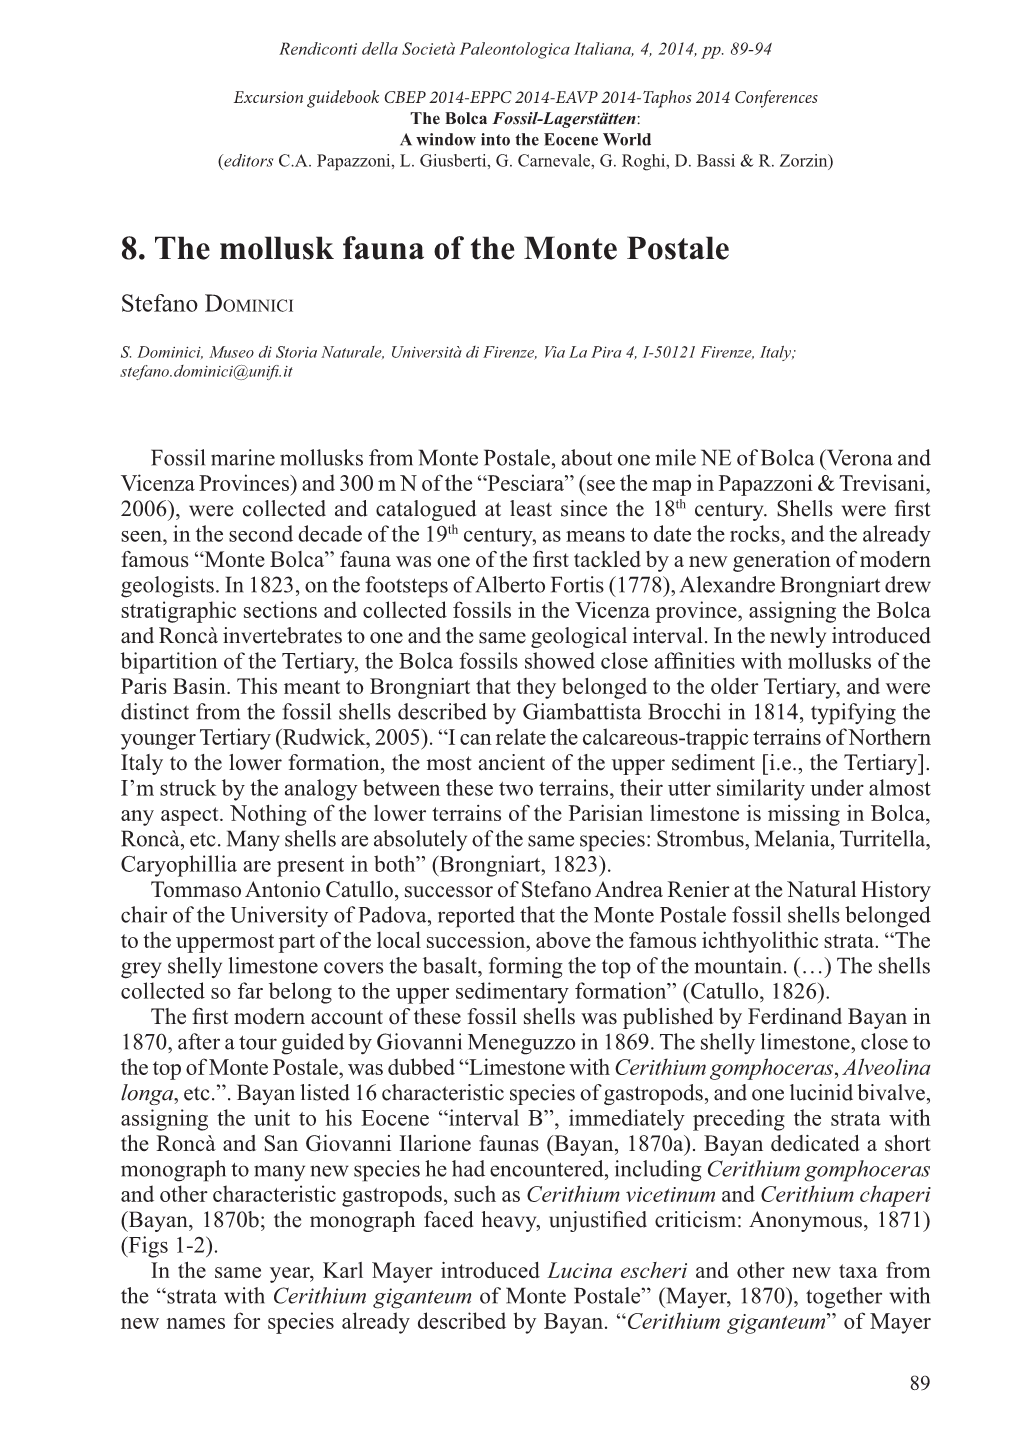 Chapter 8.The Mollusk Fauna of the Monte Postale